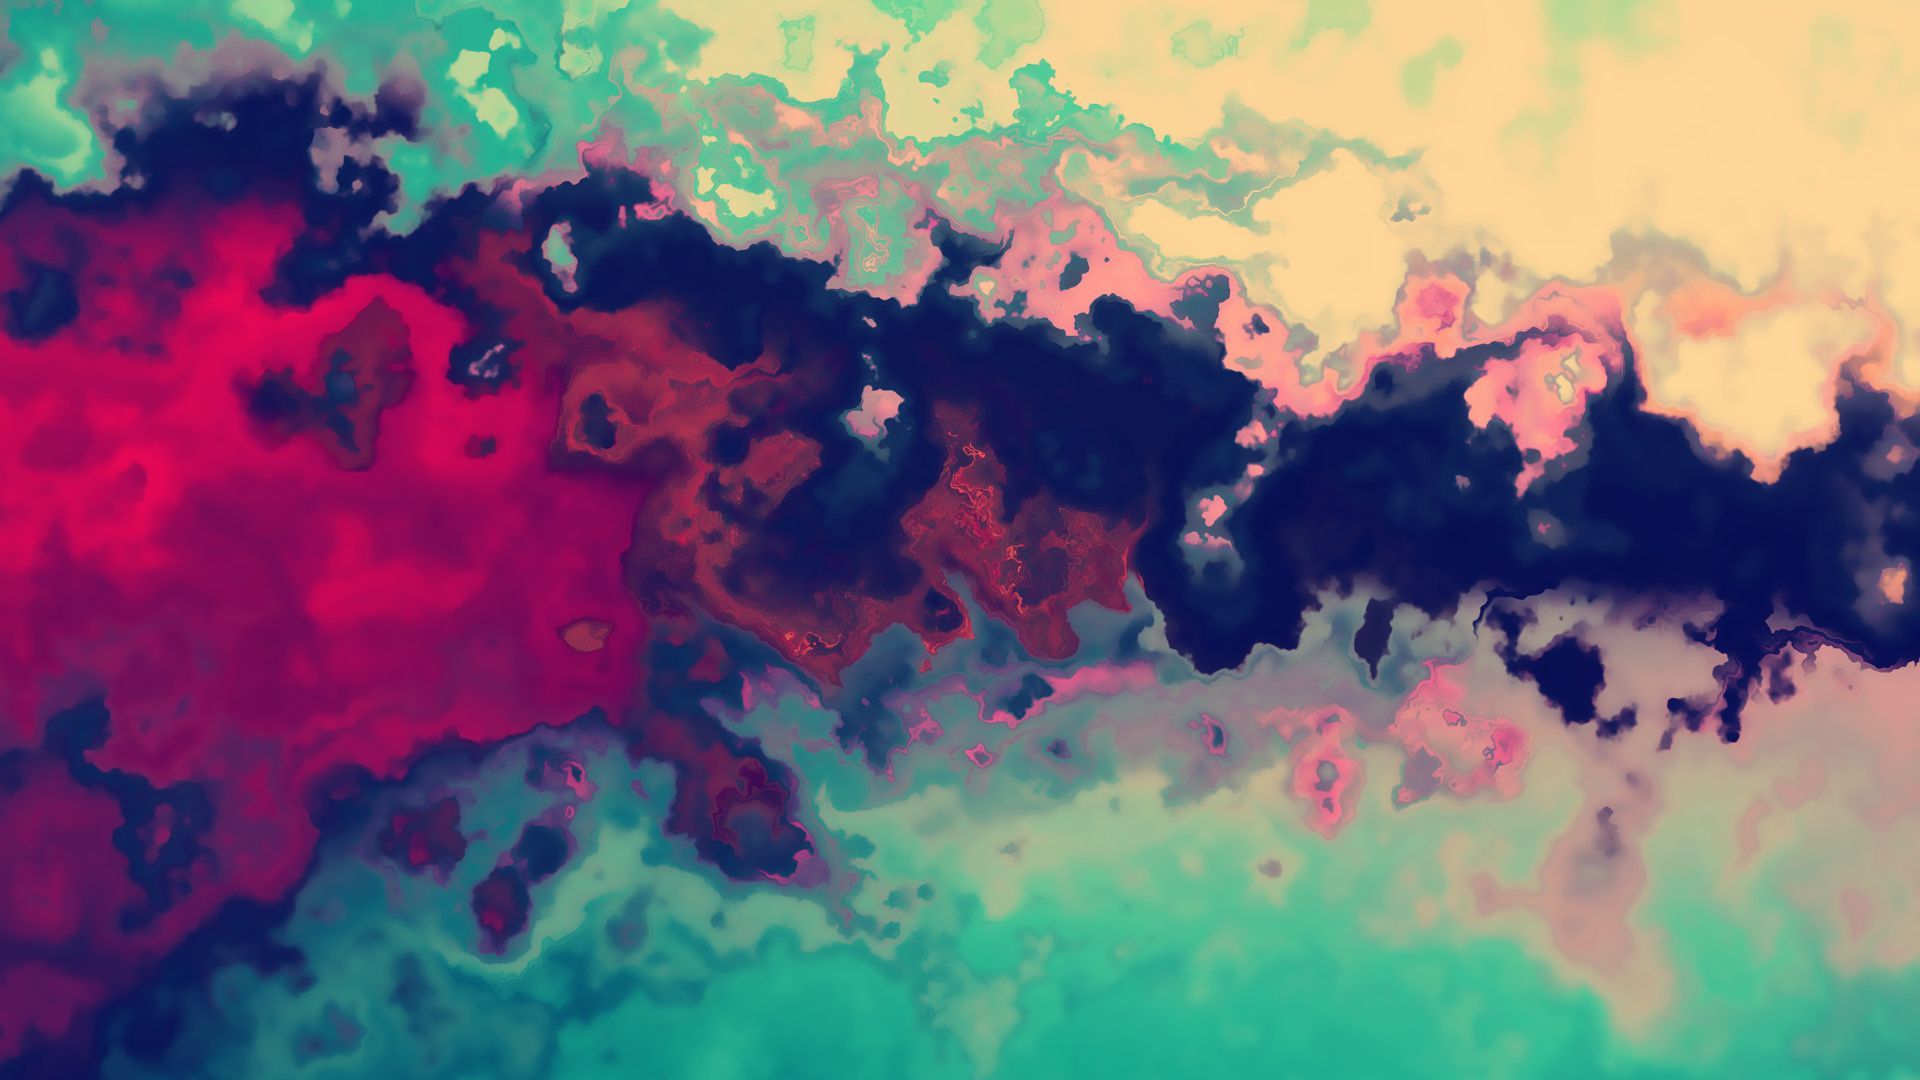 Free Download Trippy HD Wallpaper. Abstract wallpaper, Trippy wallpaper, Art wallpaper